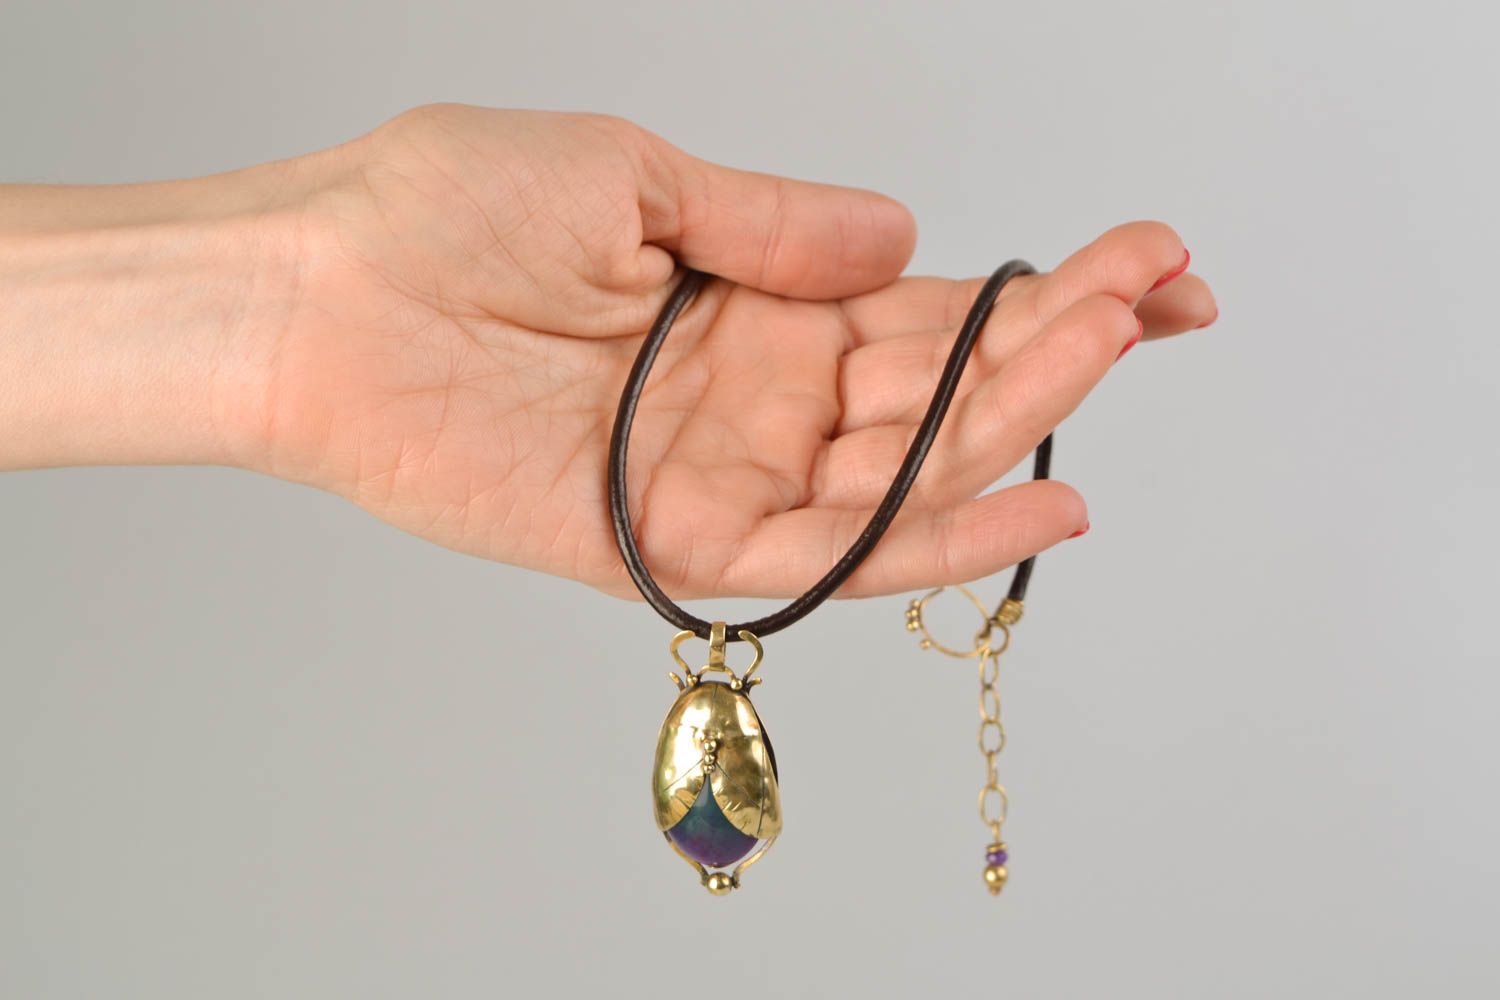 Latten pendant with agate and cord photo 2